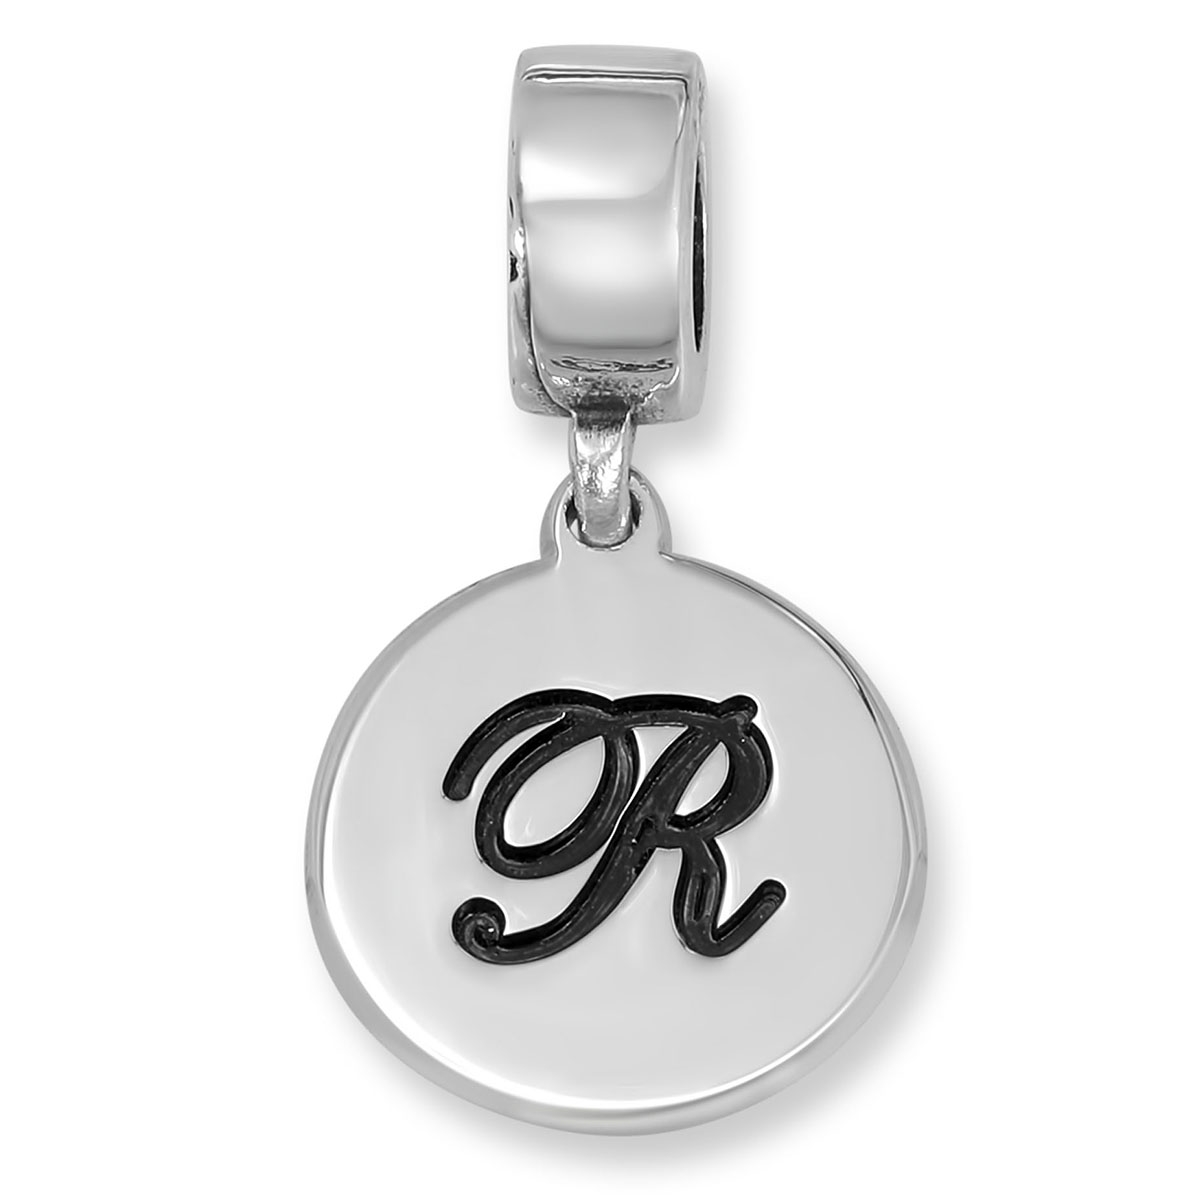 Disc Sterling Silver Script Initial Charm (English / Hebrew) - 1